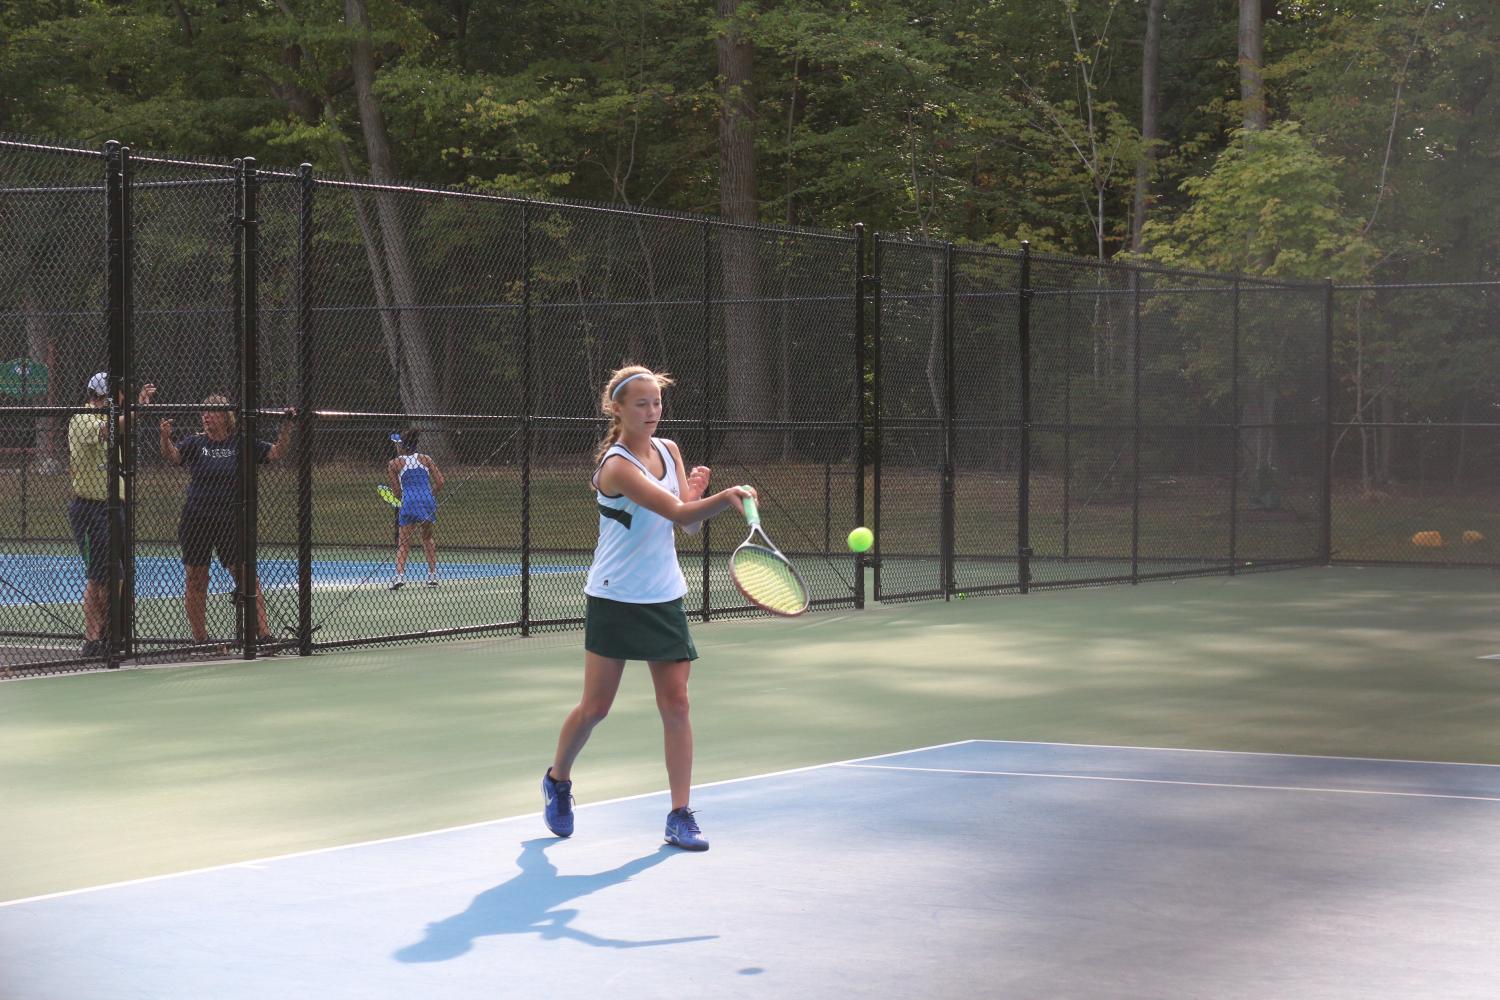 Melanie+Brentnall+hits+a+forehand.+Brentnall+is+among+the+returning+players+for+Pascack+Valley%2C+who+finished+4-12+this+season.+